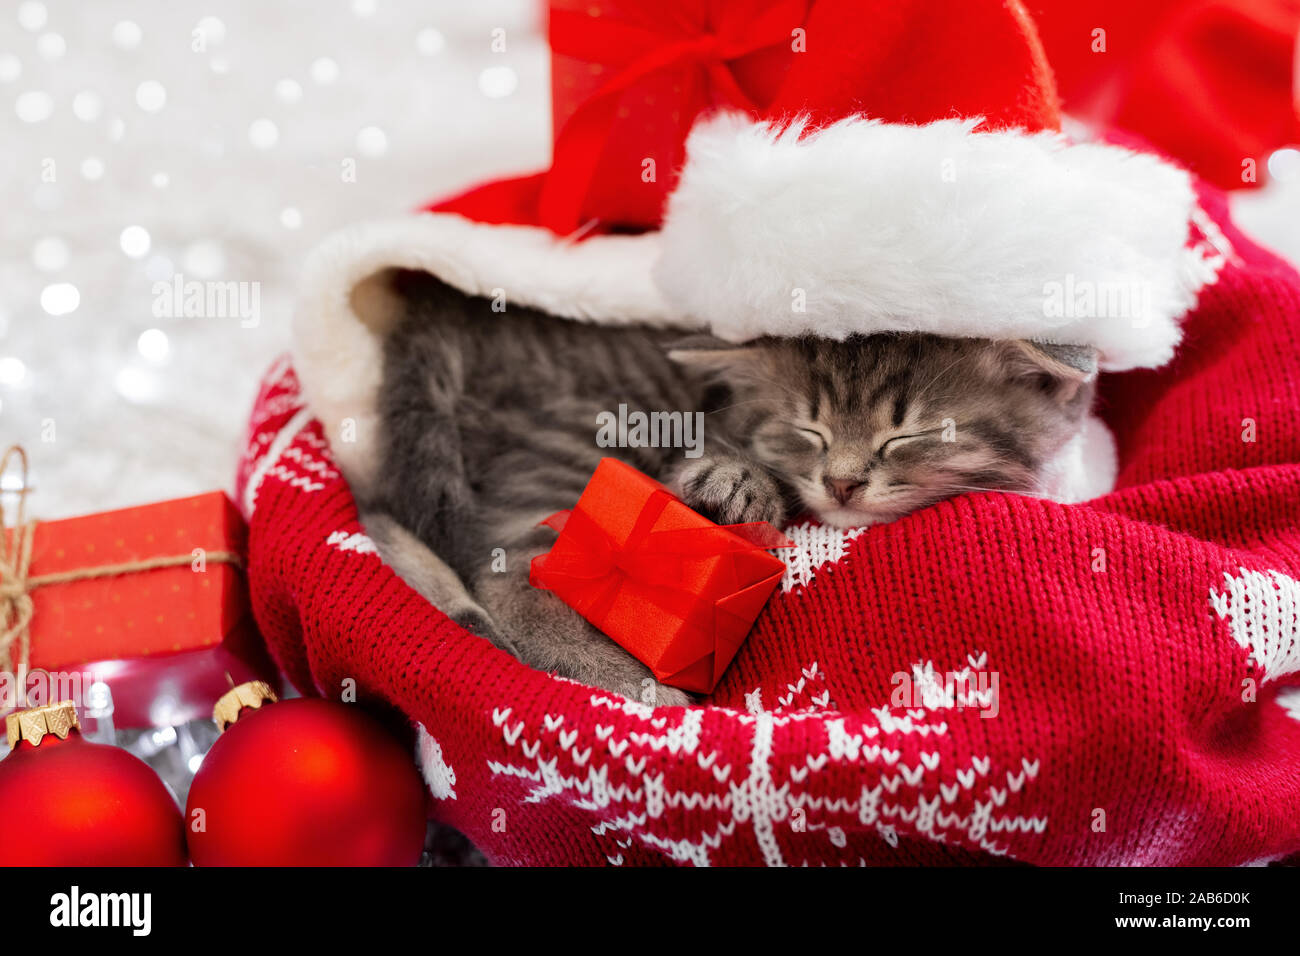 Christmas Presents Concept Christmas Cat Wearing Santa Claus Hat Holding Gift Box Sleeping On Plaid Under Christmas Tree Adorable Little Tabby Stock Photo Alamy